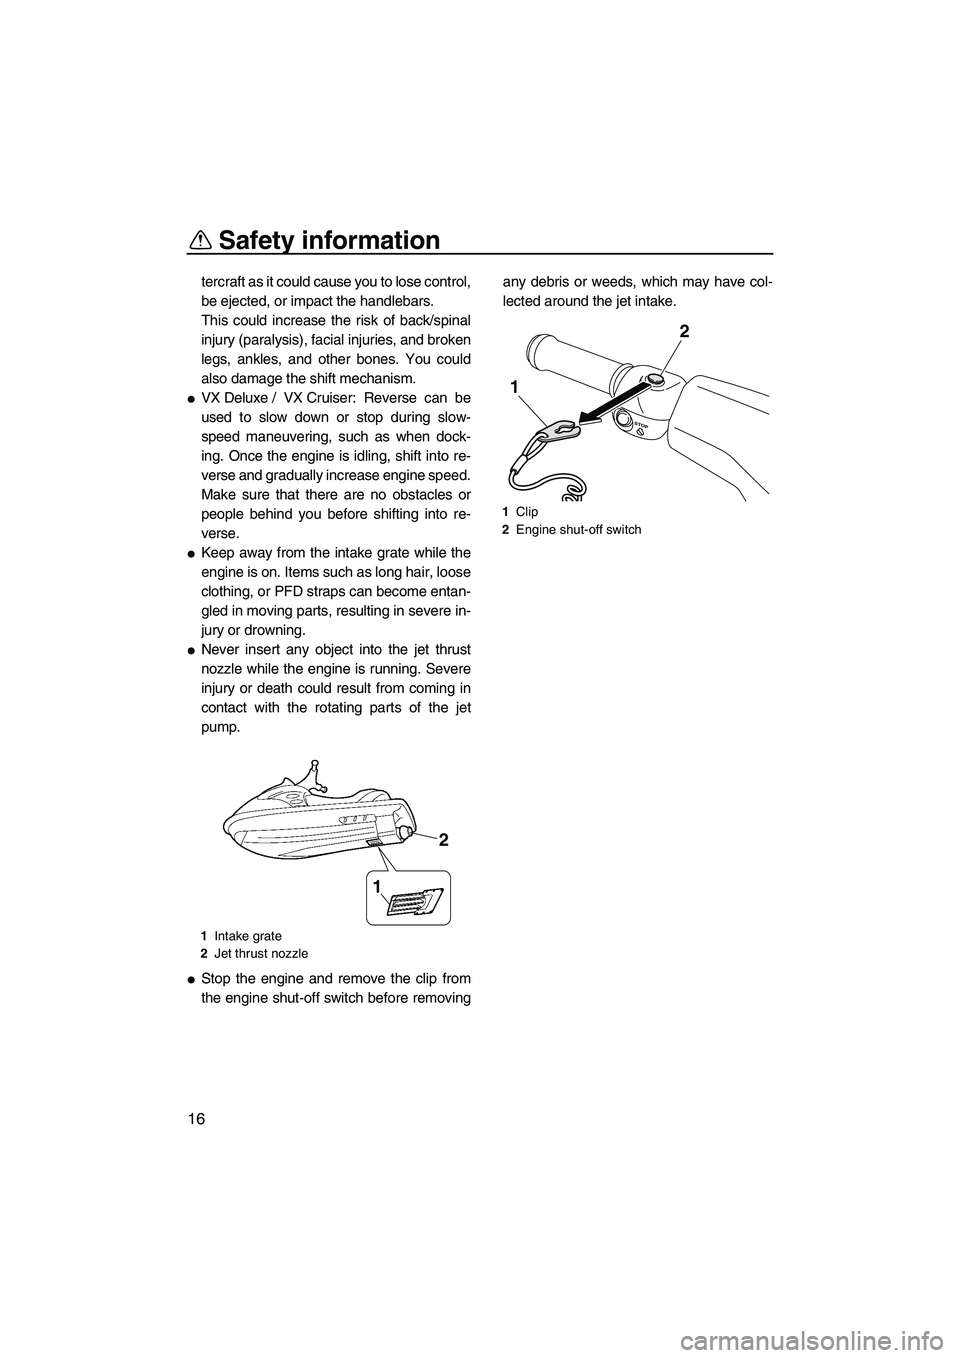 YAMAHA VX SPORT 2013 Owners Manual Safety information
16
tercraft as it could cause you to lose control,
be ejected, or impact the handlebars.
This could increase the risk of back/spinal
injury (paralysis), facial injuries, and broken
